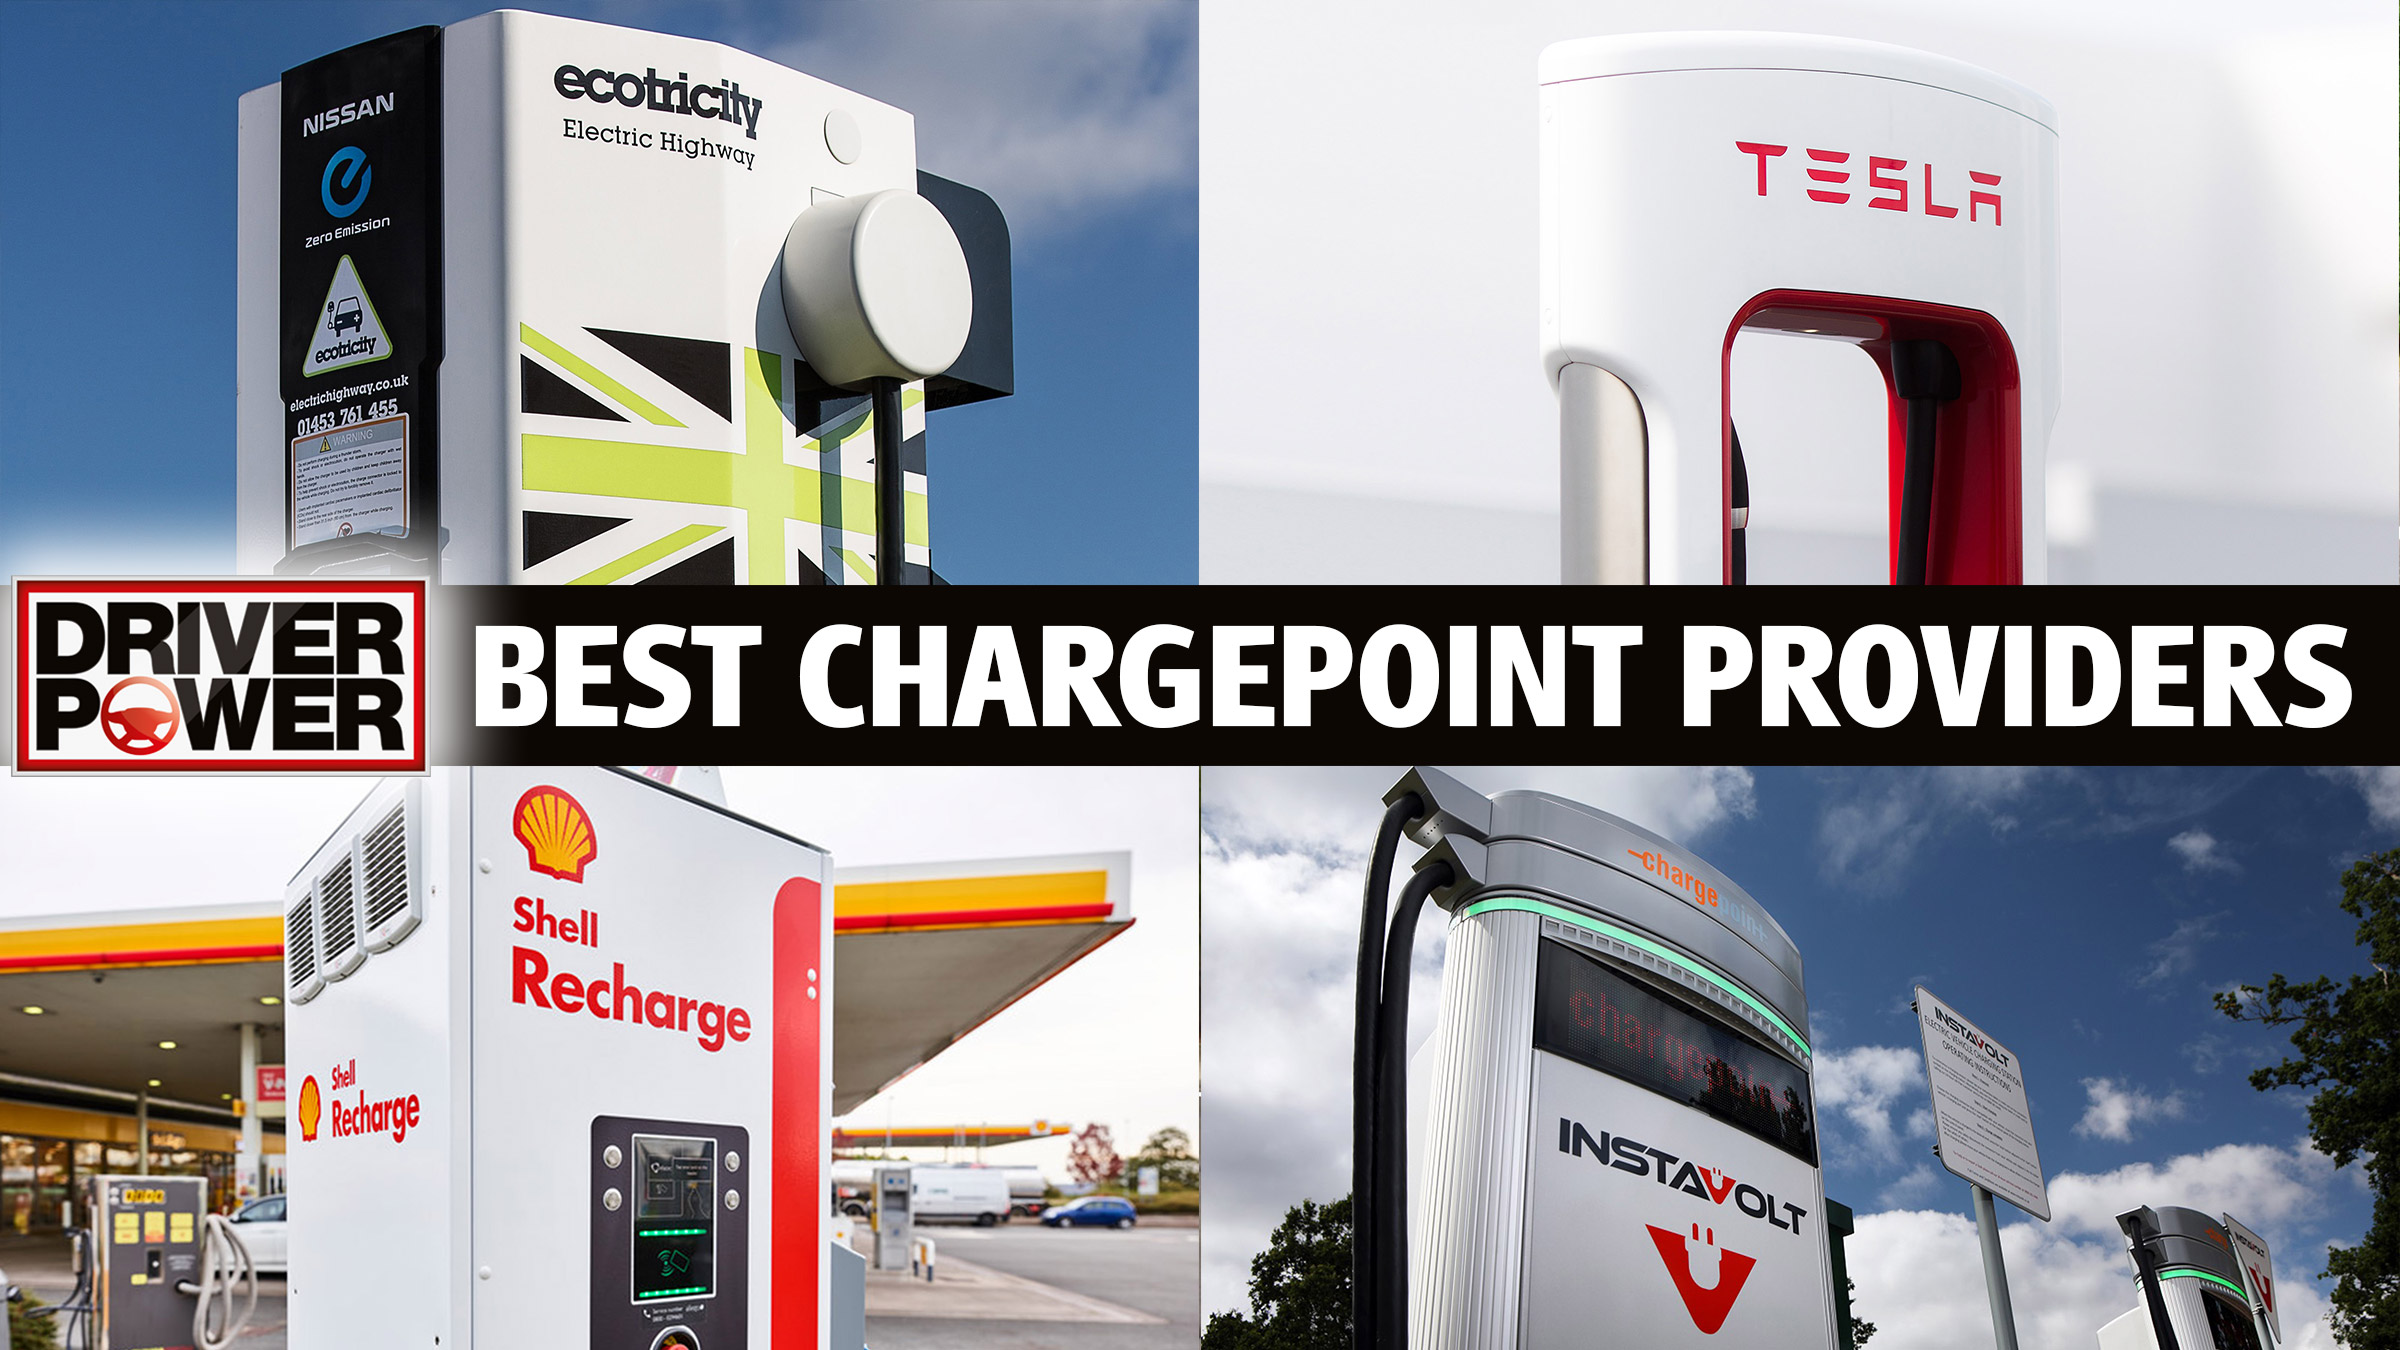 UK Driver Power 2020 the best electric car chargepoint providers